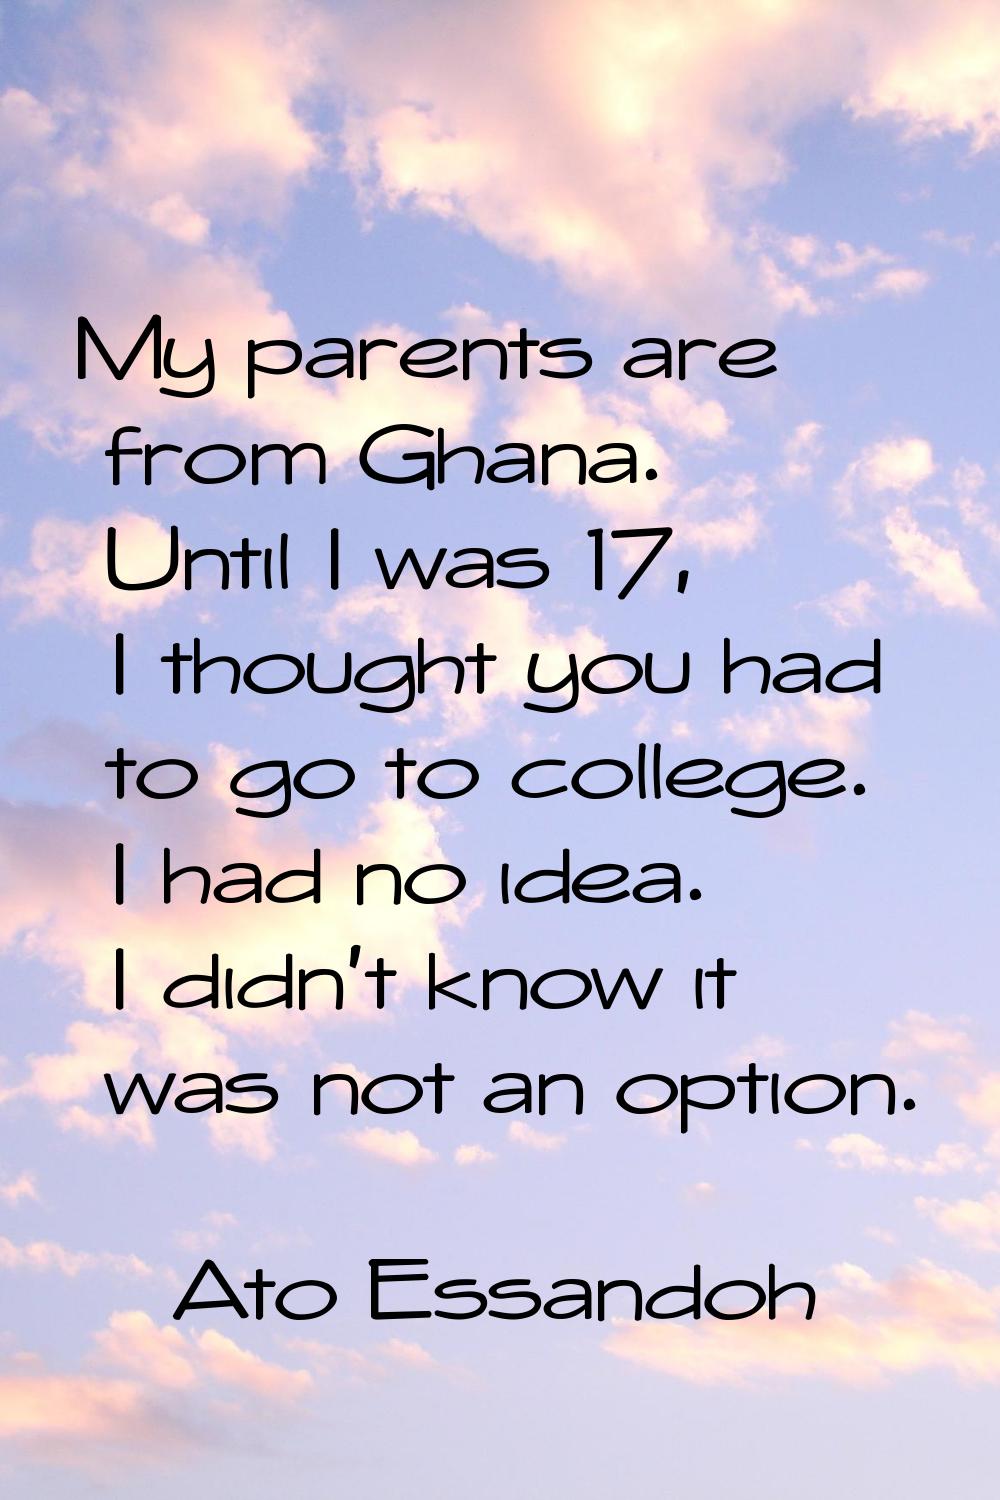 My parents are from Ghana. Until I was 17, I thought you had to go to college. I had no idea. I did